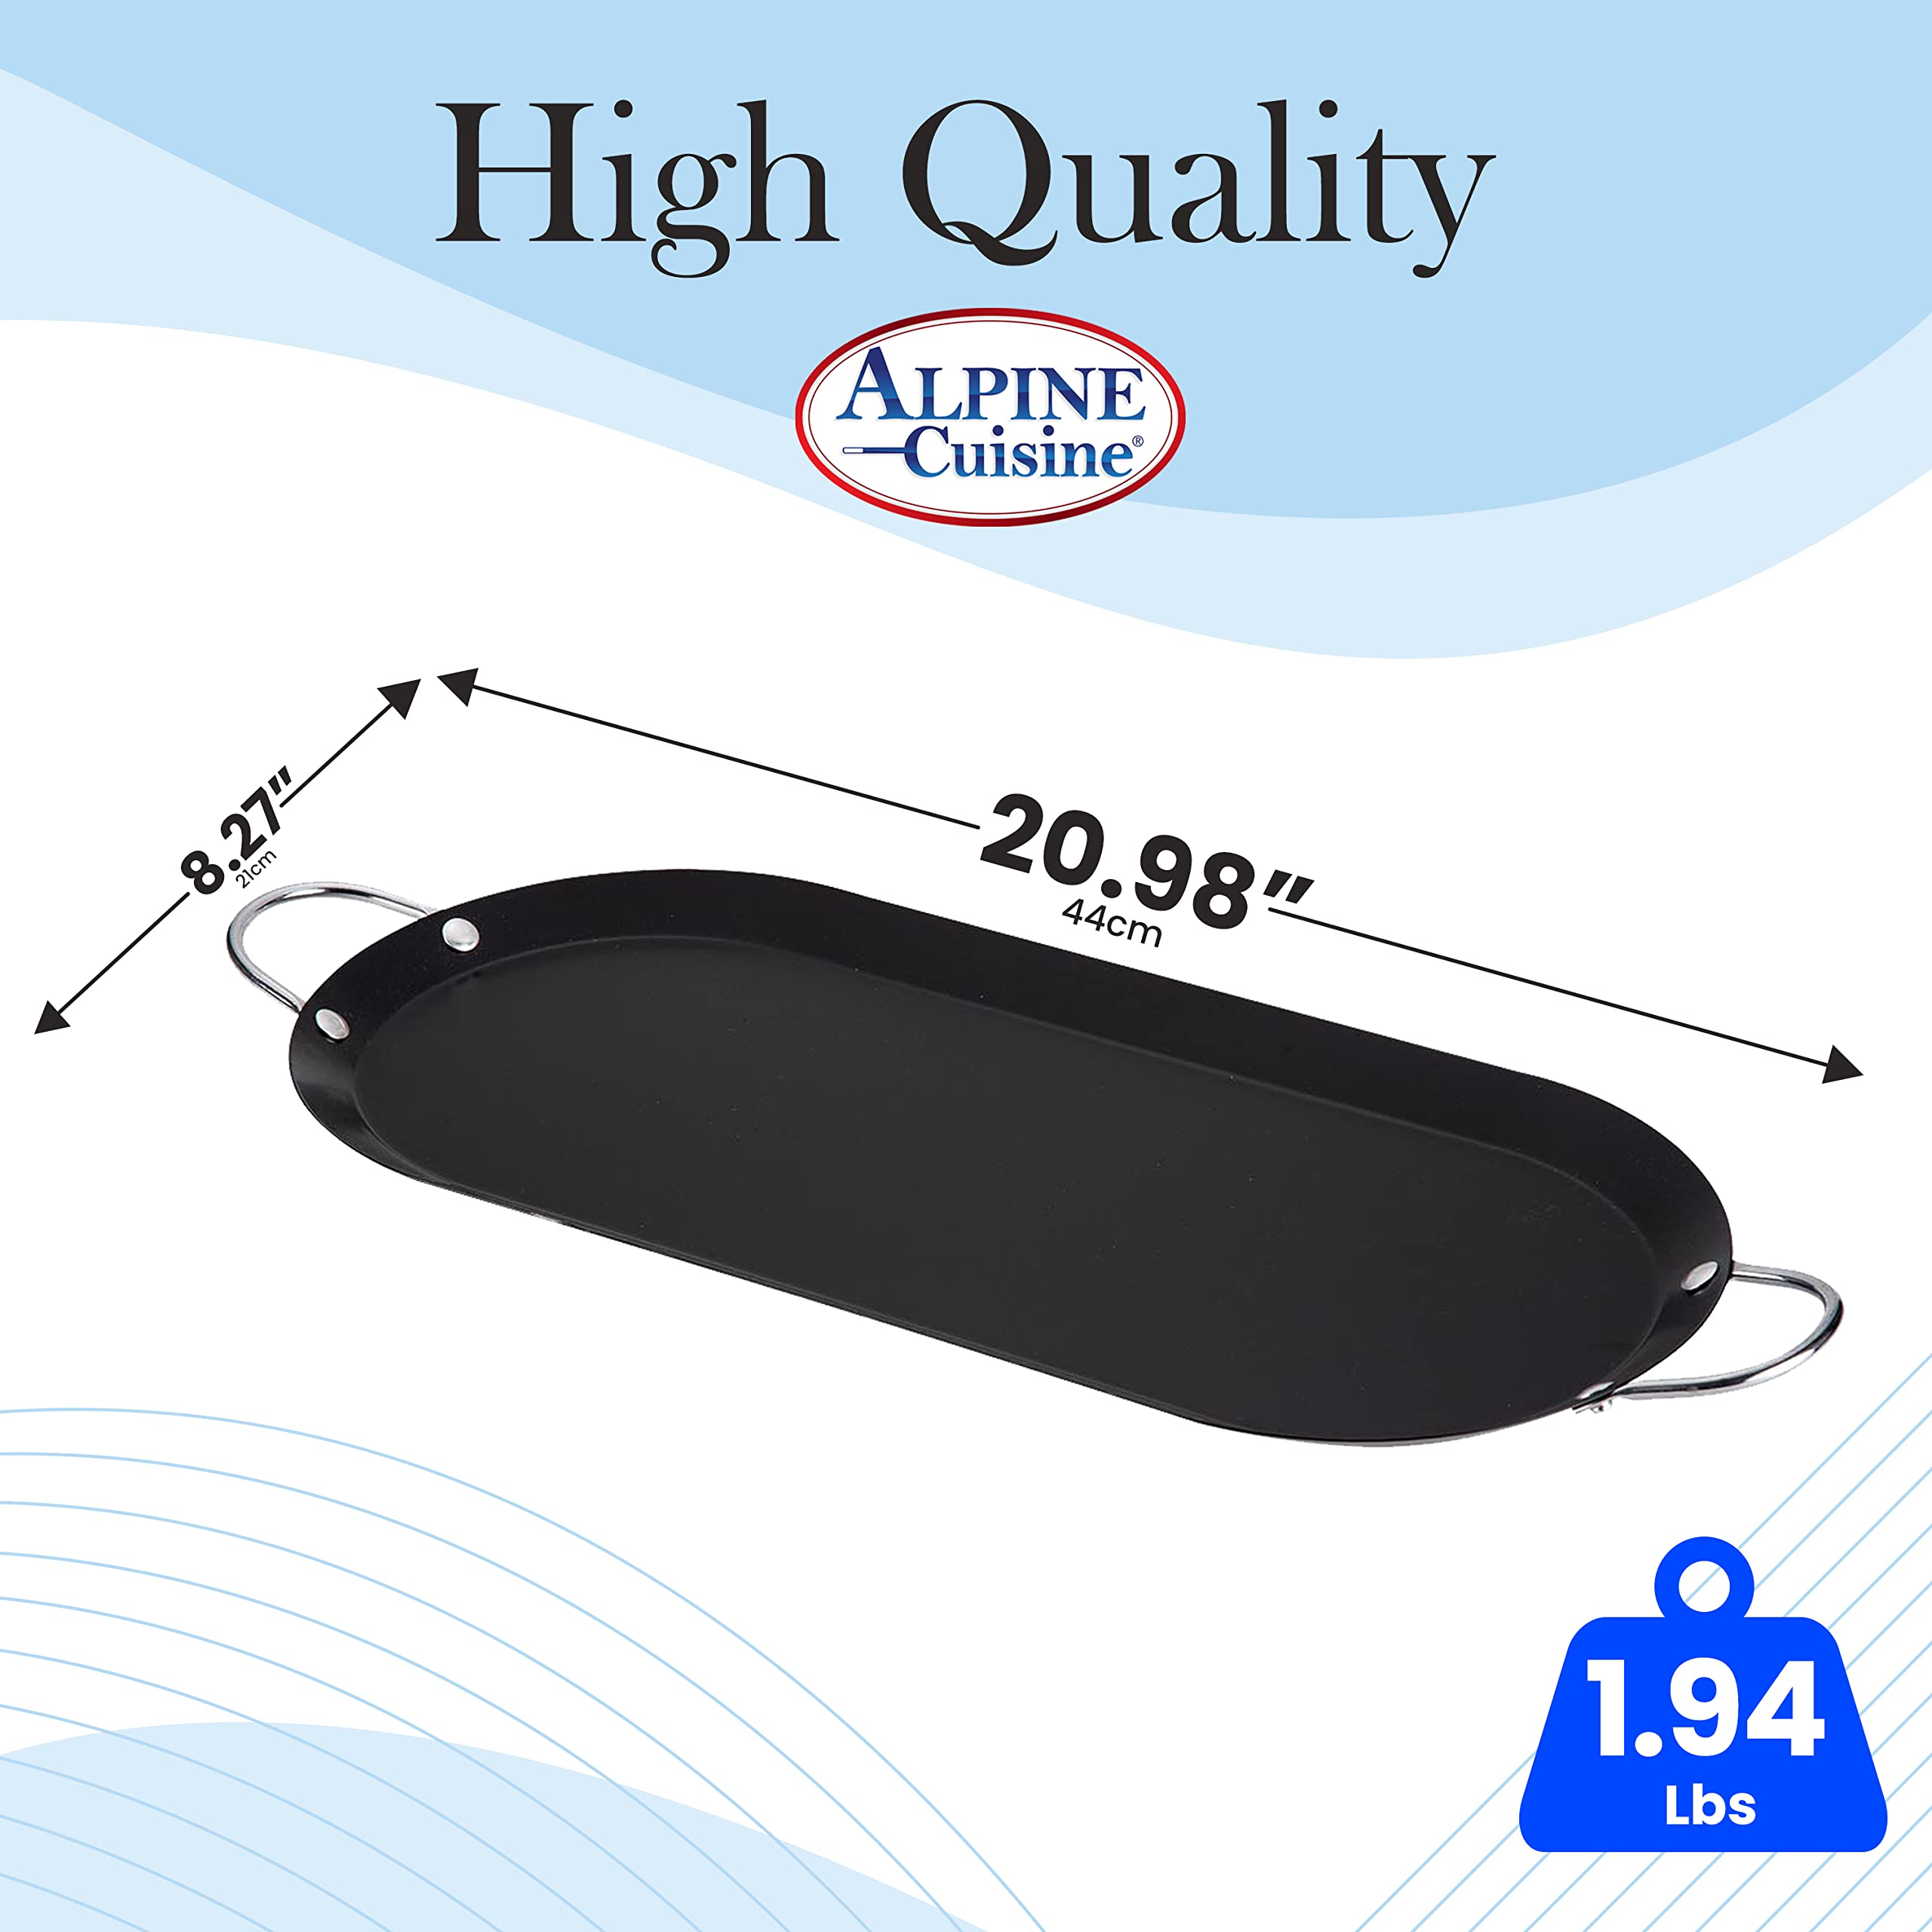 Alpine Cuisine Nonstick Round Comal 9.5-Inch - Black Carbon Steel Tortilla  Comal with Double Handle - Durable, Heavy Duty Comal for Cooking -  Even-Heating & Long Lasting - Versatile Kitchen Cookware